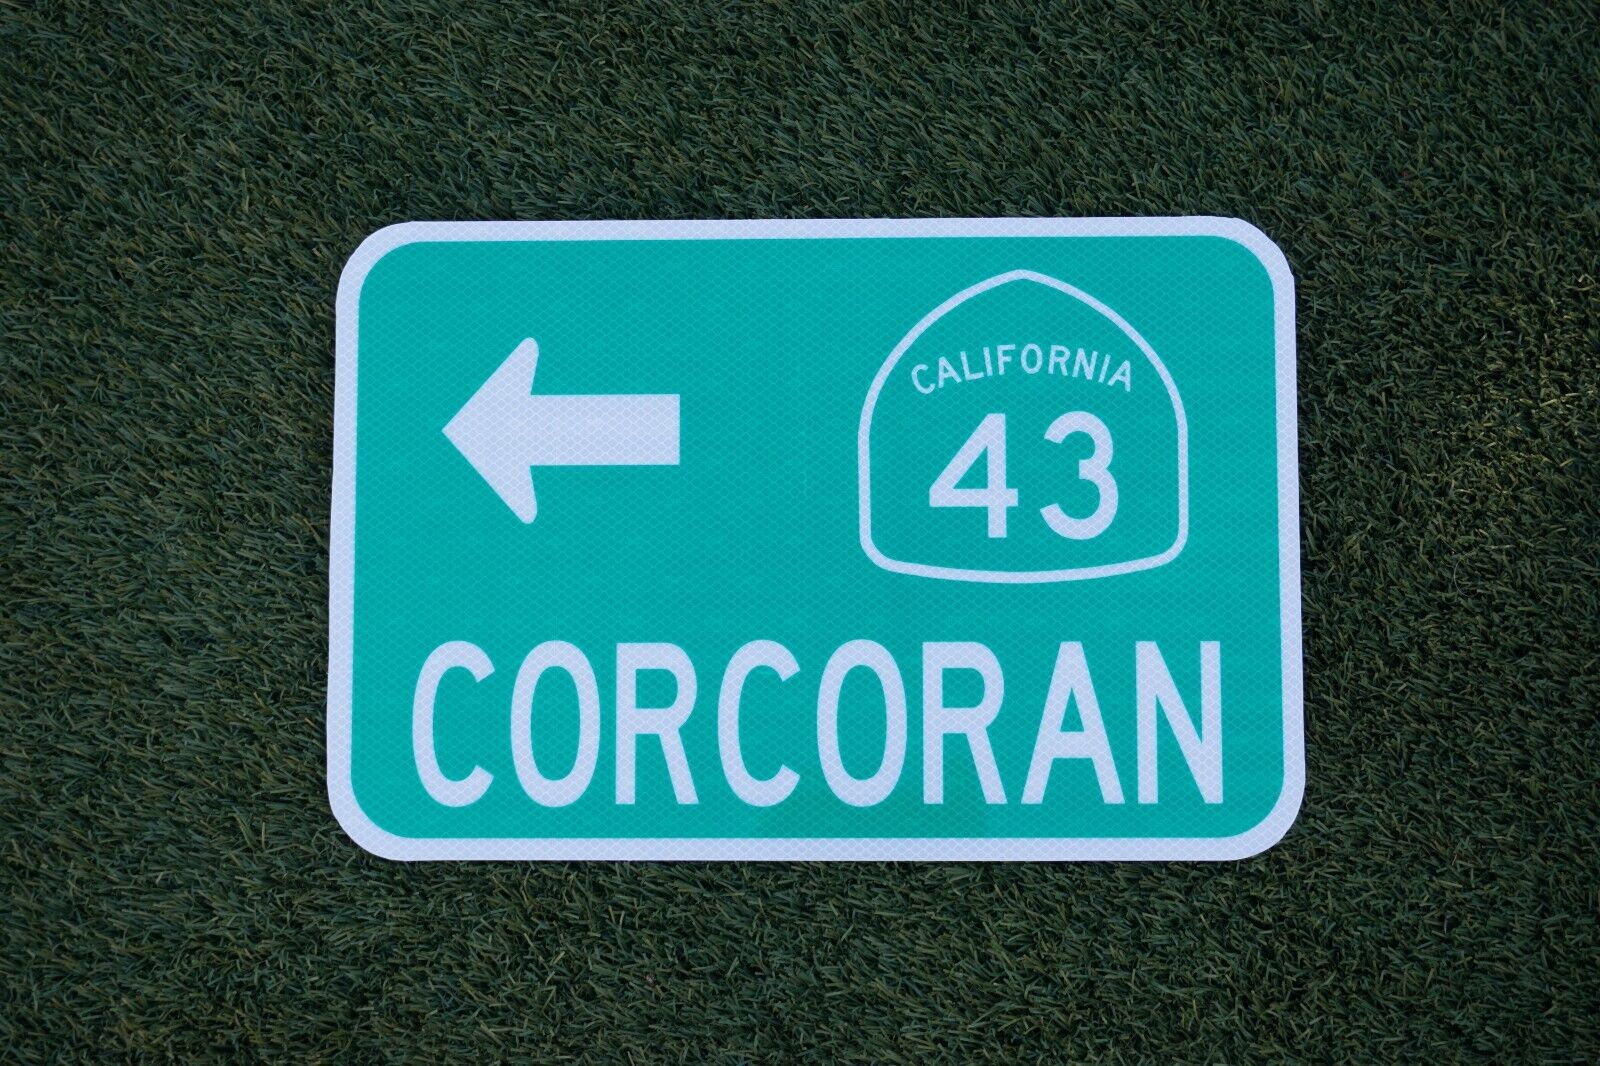 CORCORAN California Hwy 43 route road sign 18x12\